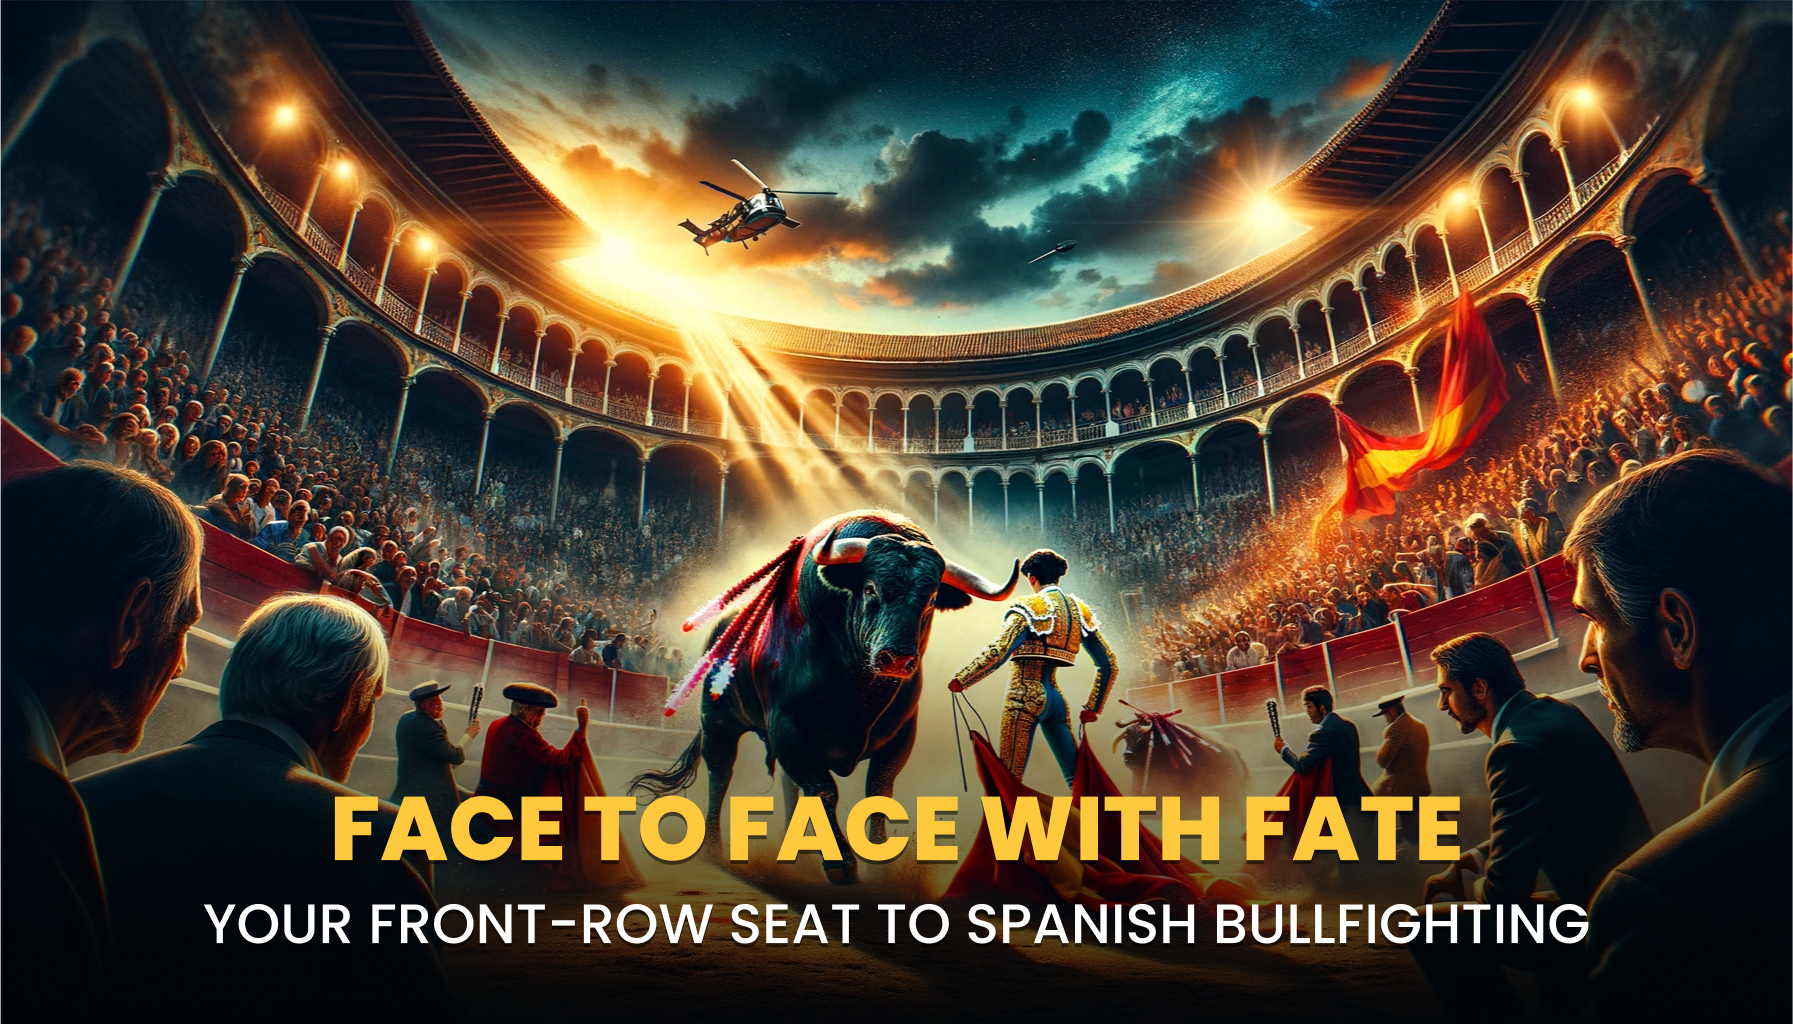 Face to Face with Fate: Your Front-Row Seat to Spanish Bullfighting